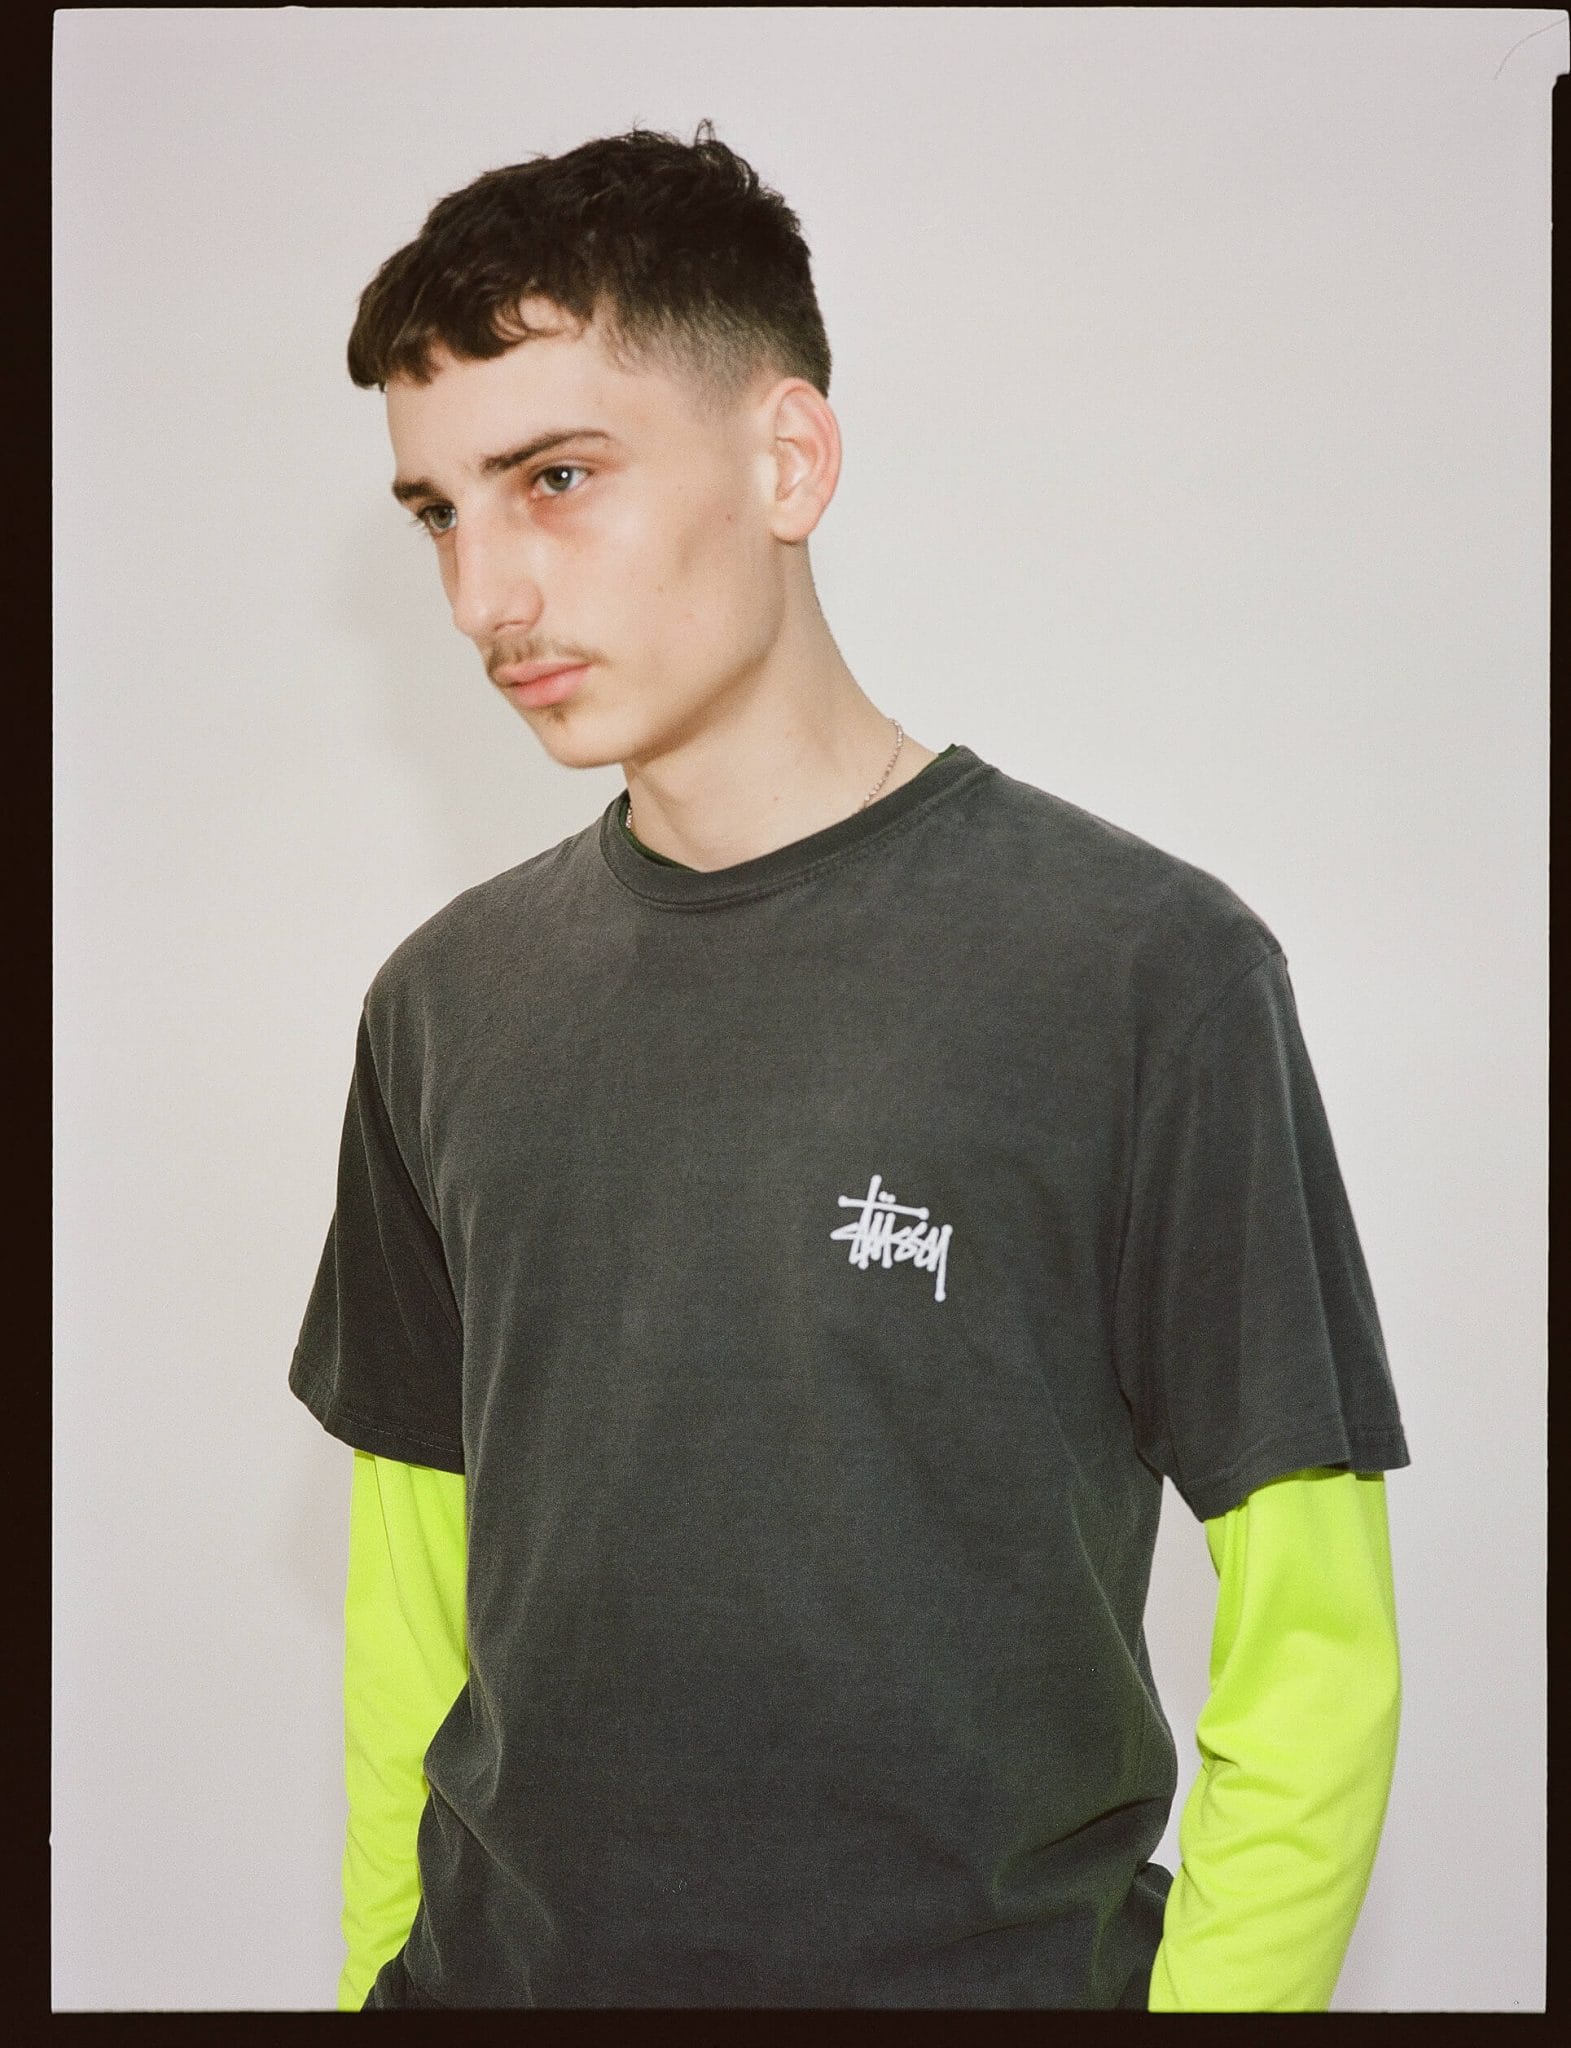 Stüssy Launches Extra Tough Workgear Collection for the Street ...